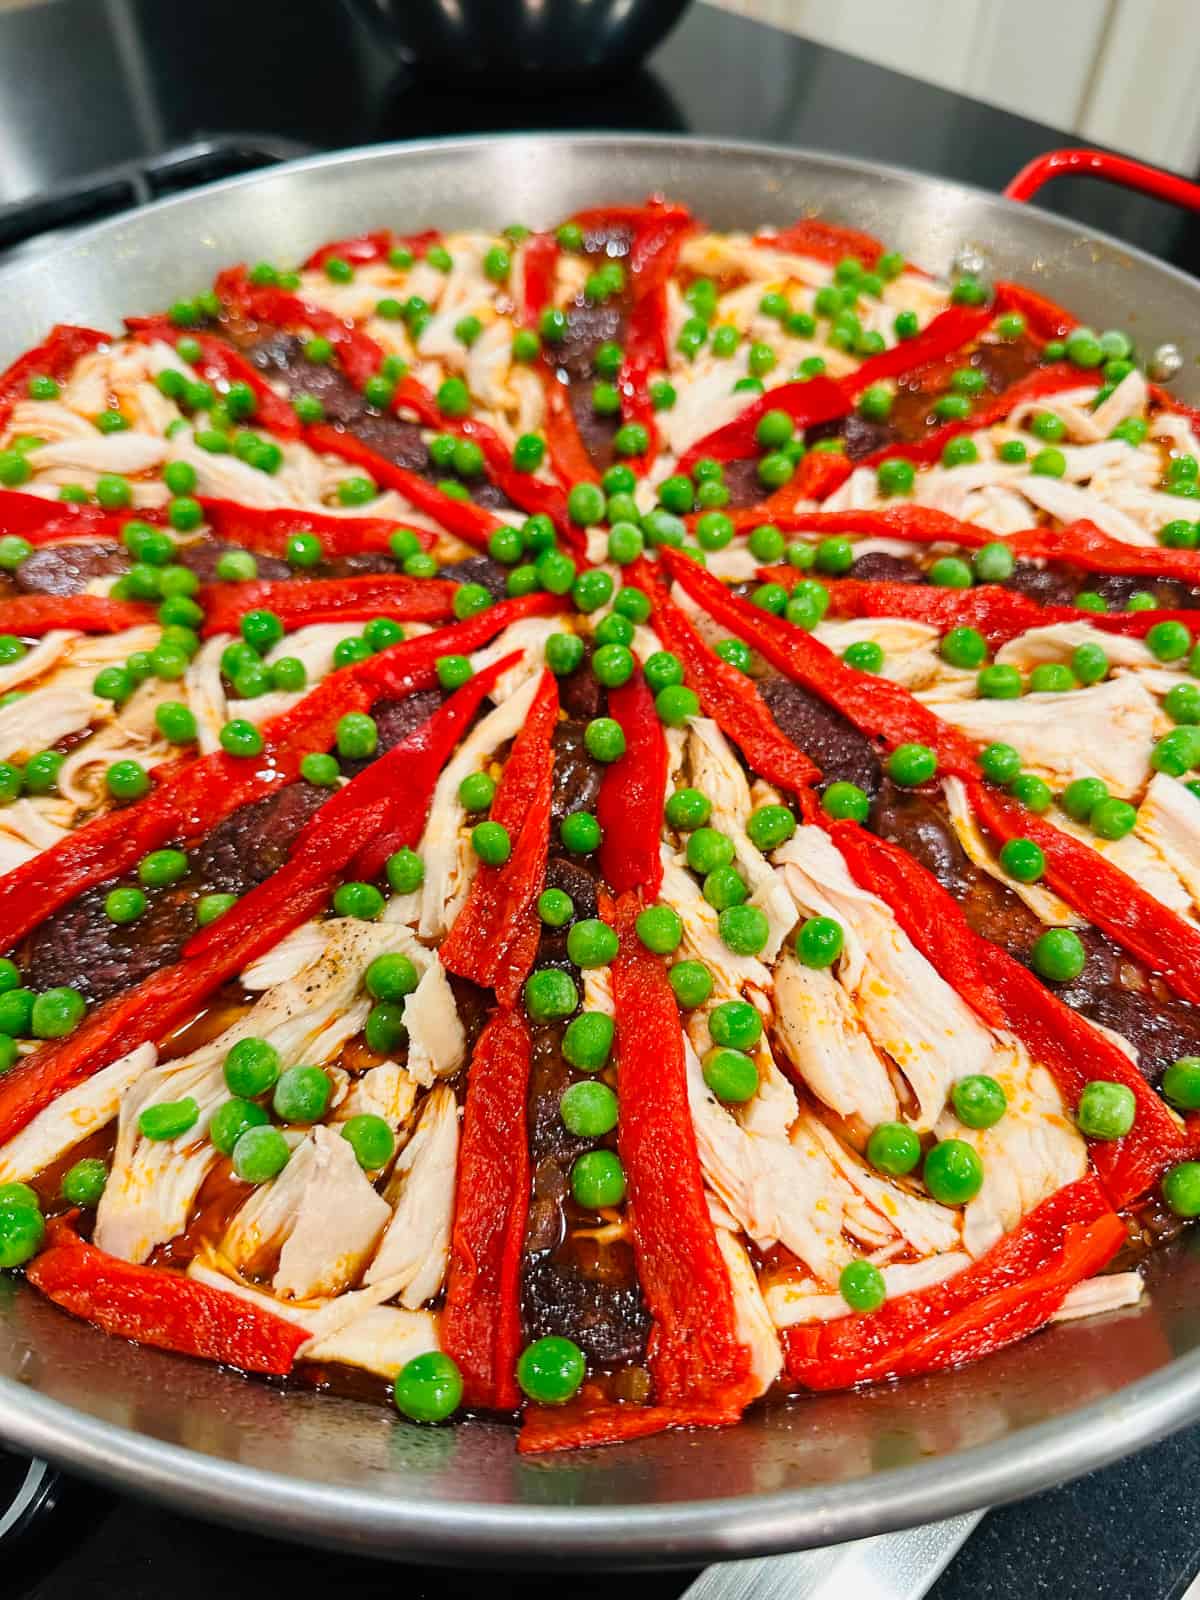 Chicken, chorizo, piquillo peppers, and peas arranged like spokes of a wheel in metal pan.